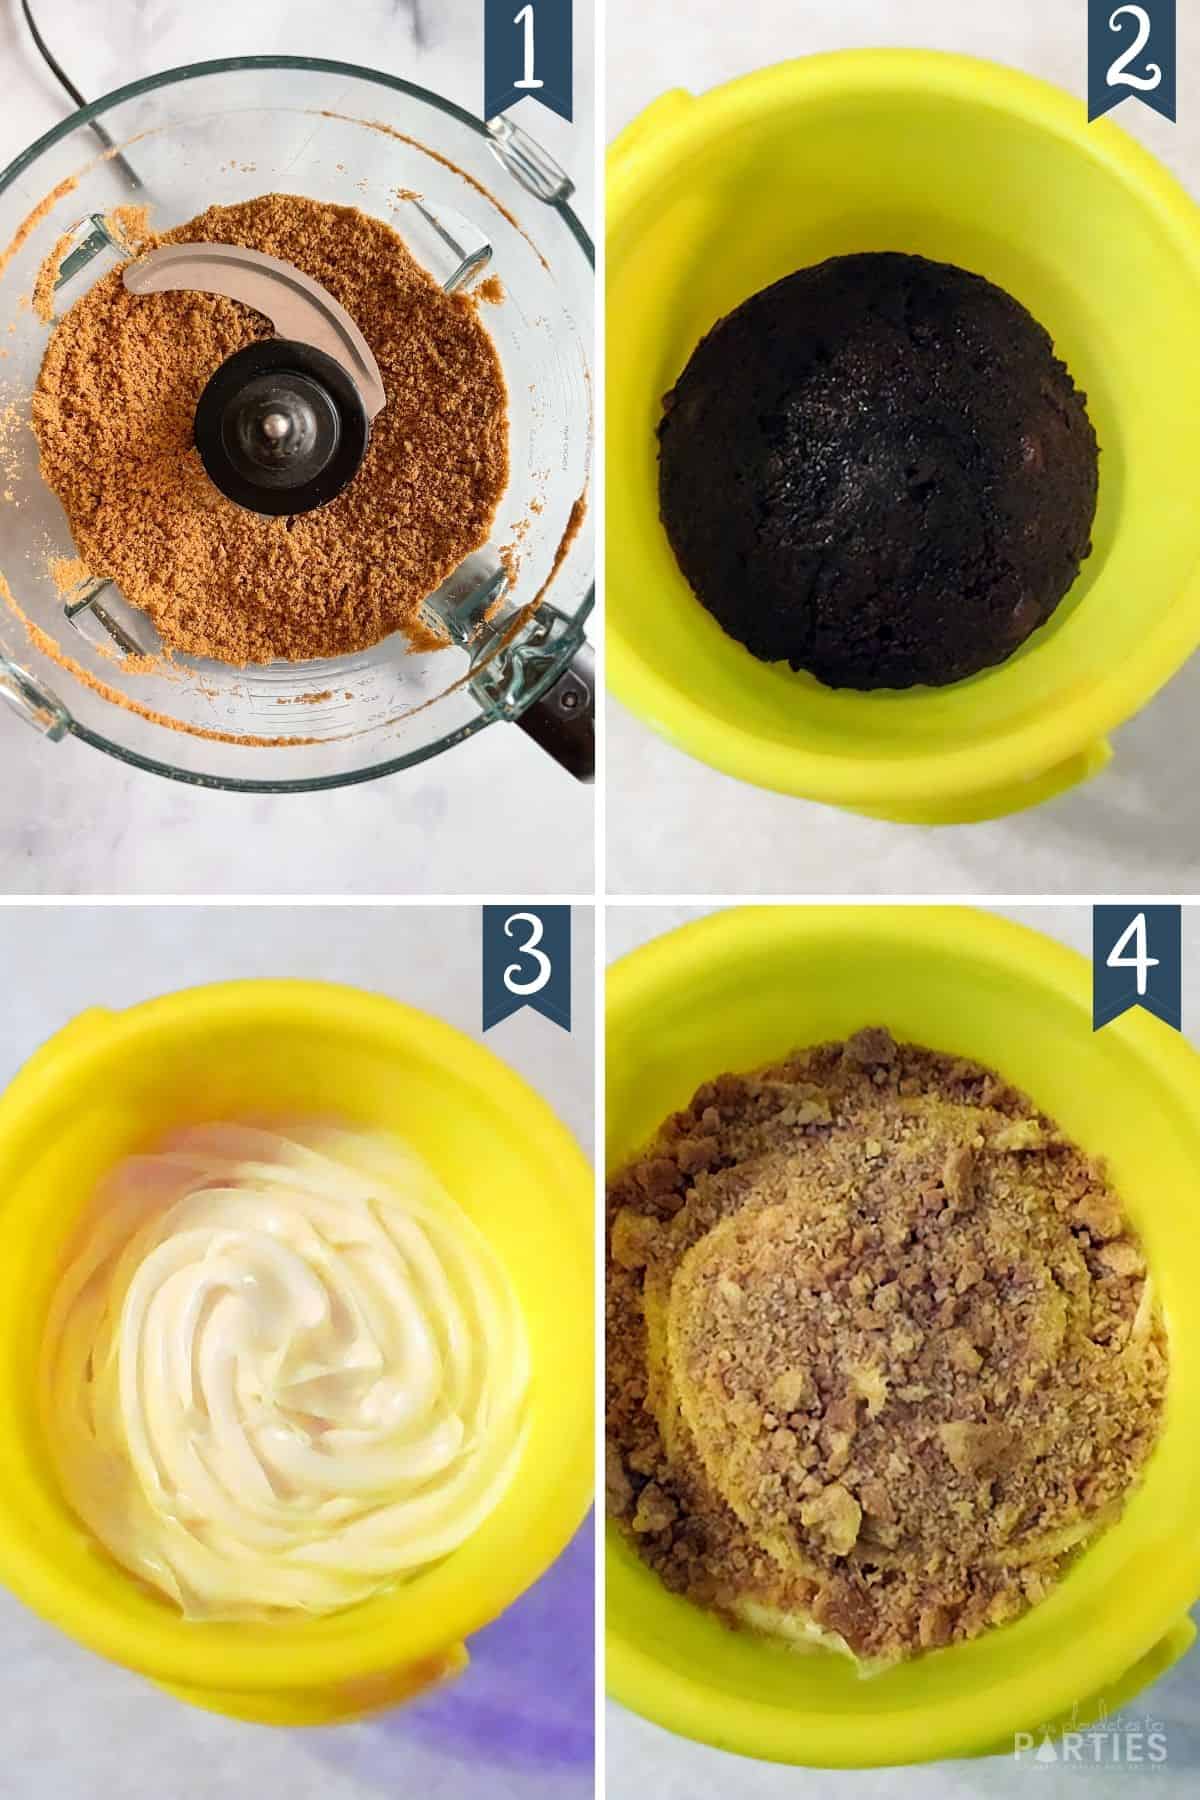 How to Make Sand Bucket Cupcakes.